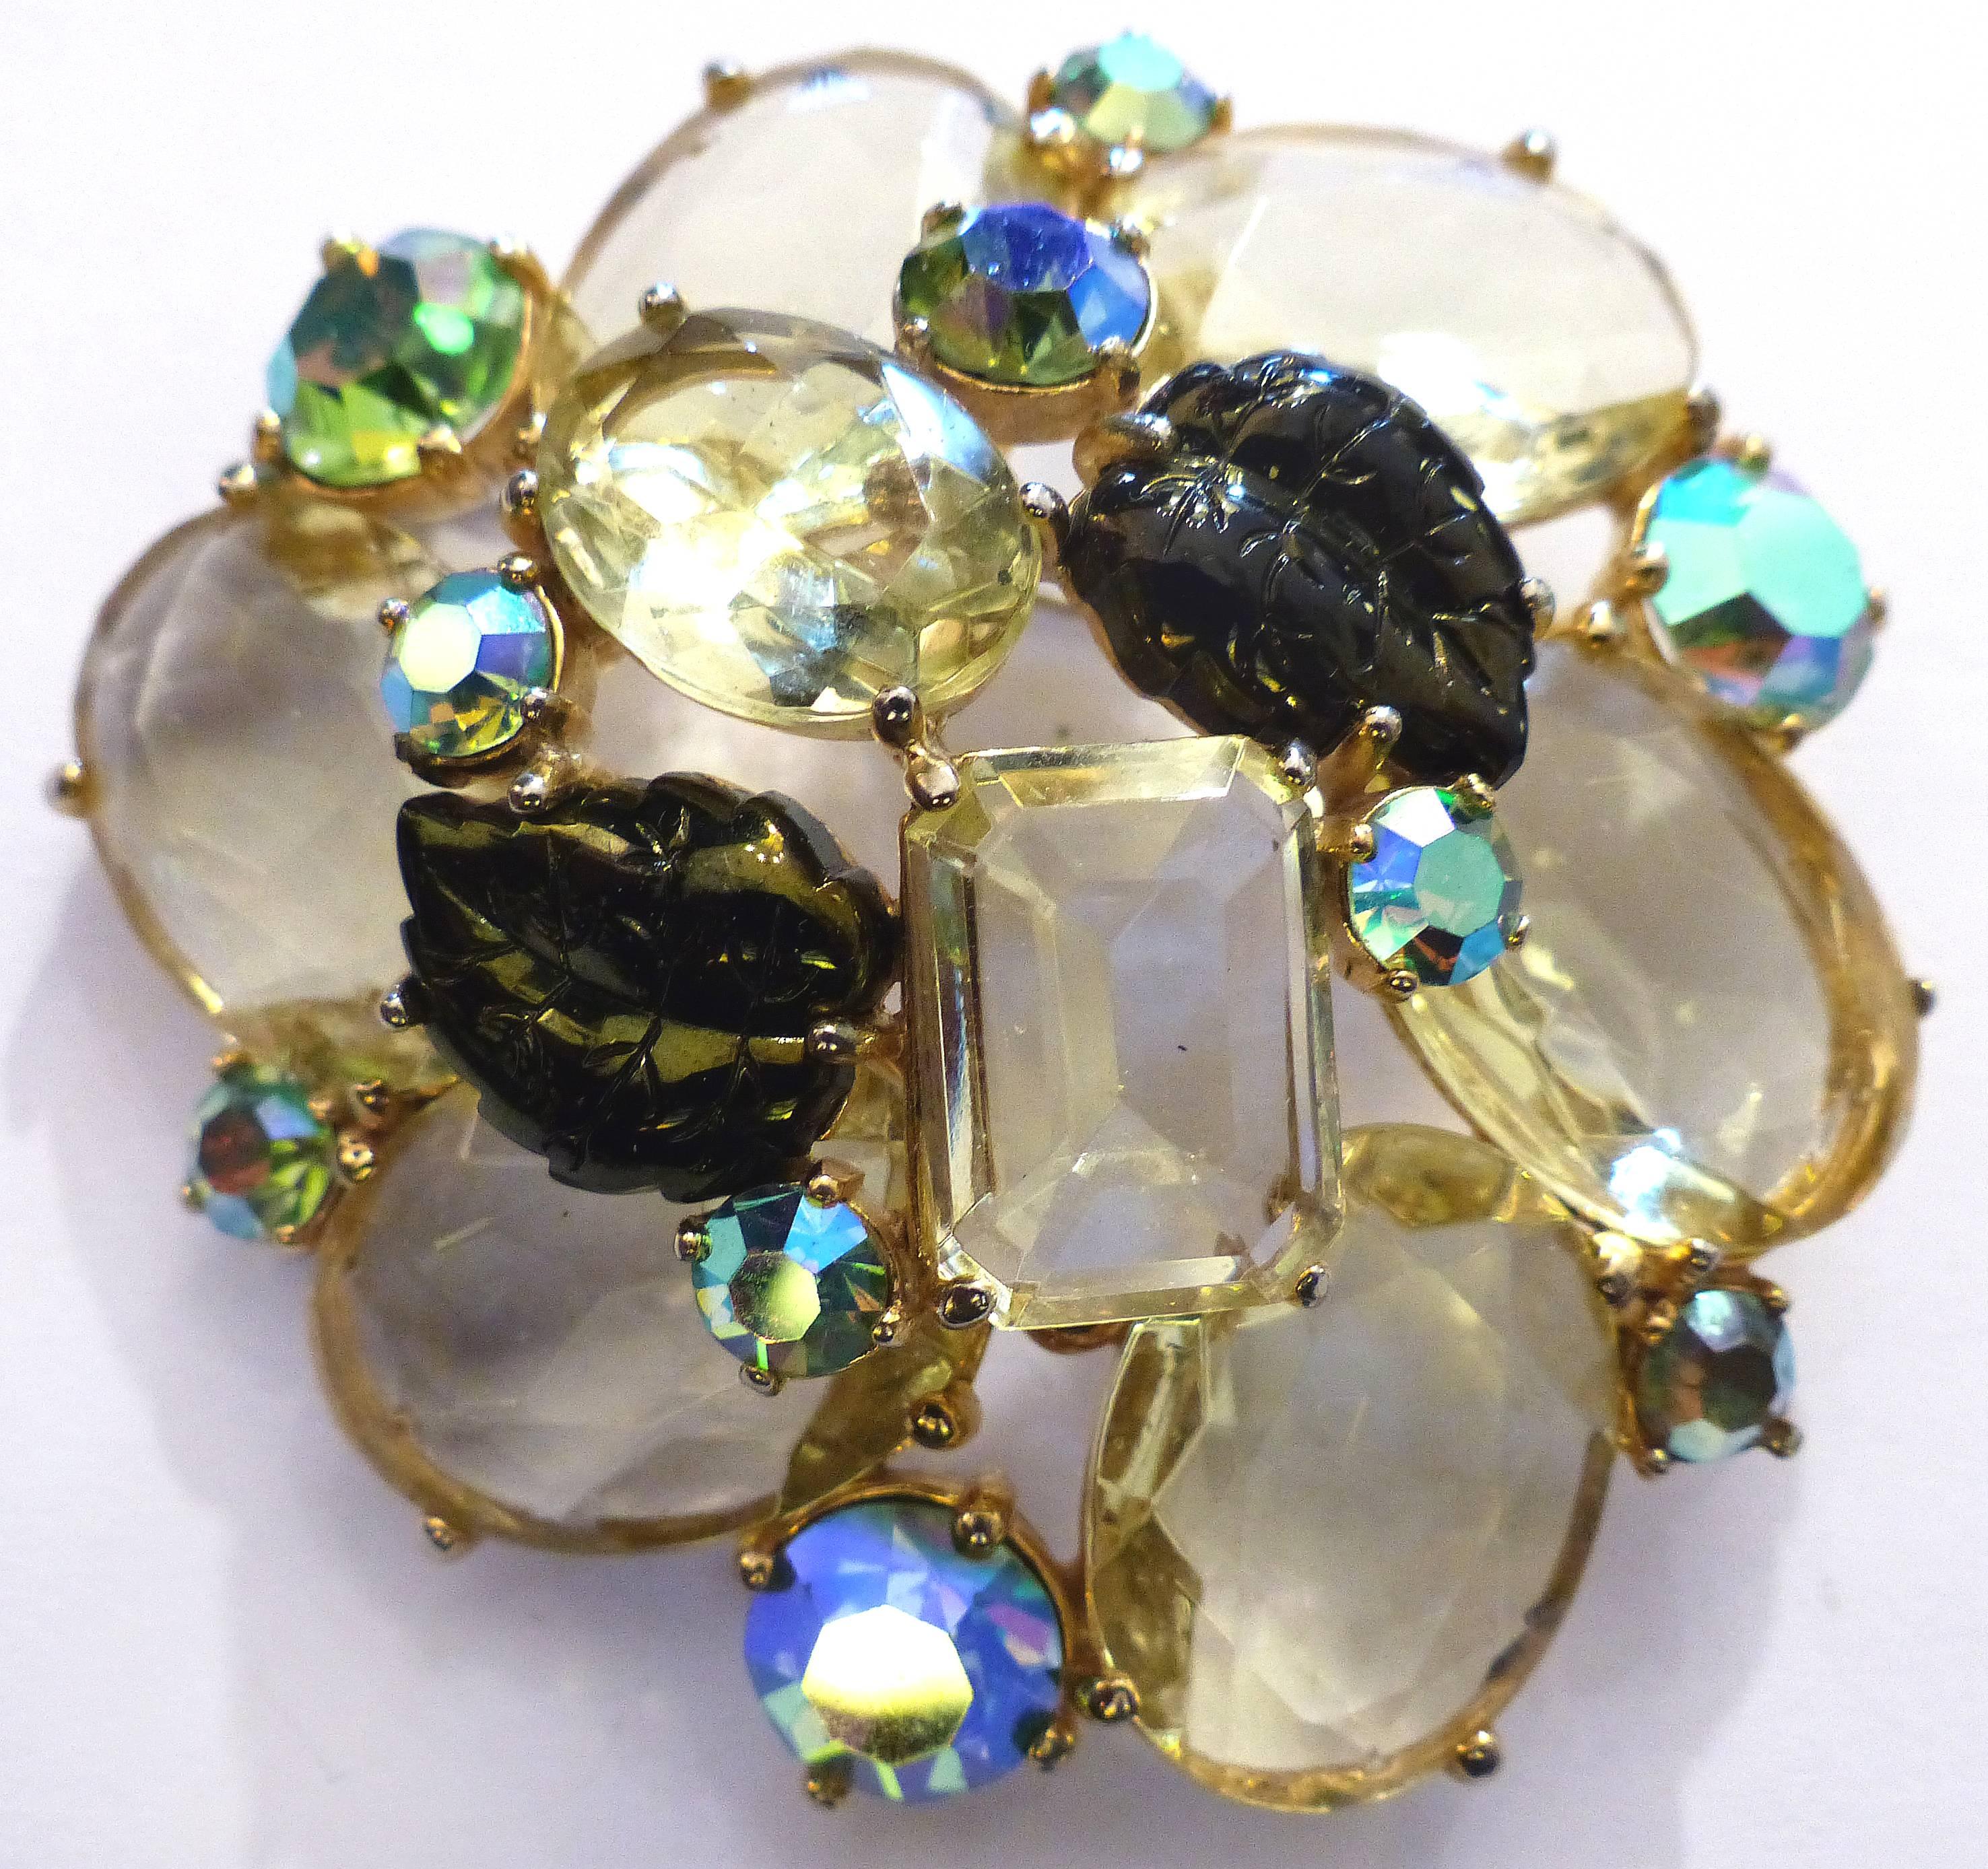 1950s Elsa Schiaparelli Brooch & Earrings Set with Swarovski Aurora Crystals

$1,895.00.

 

A 1950s Elsa Schiaparelli brooch and earring set that is a fine example of Schiaparelli's work. Set with warm tone crystal stones and Swarovski Aurora